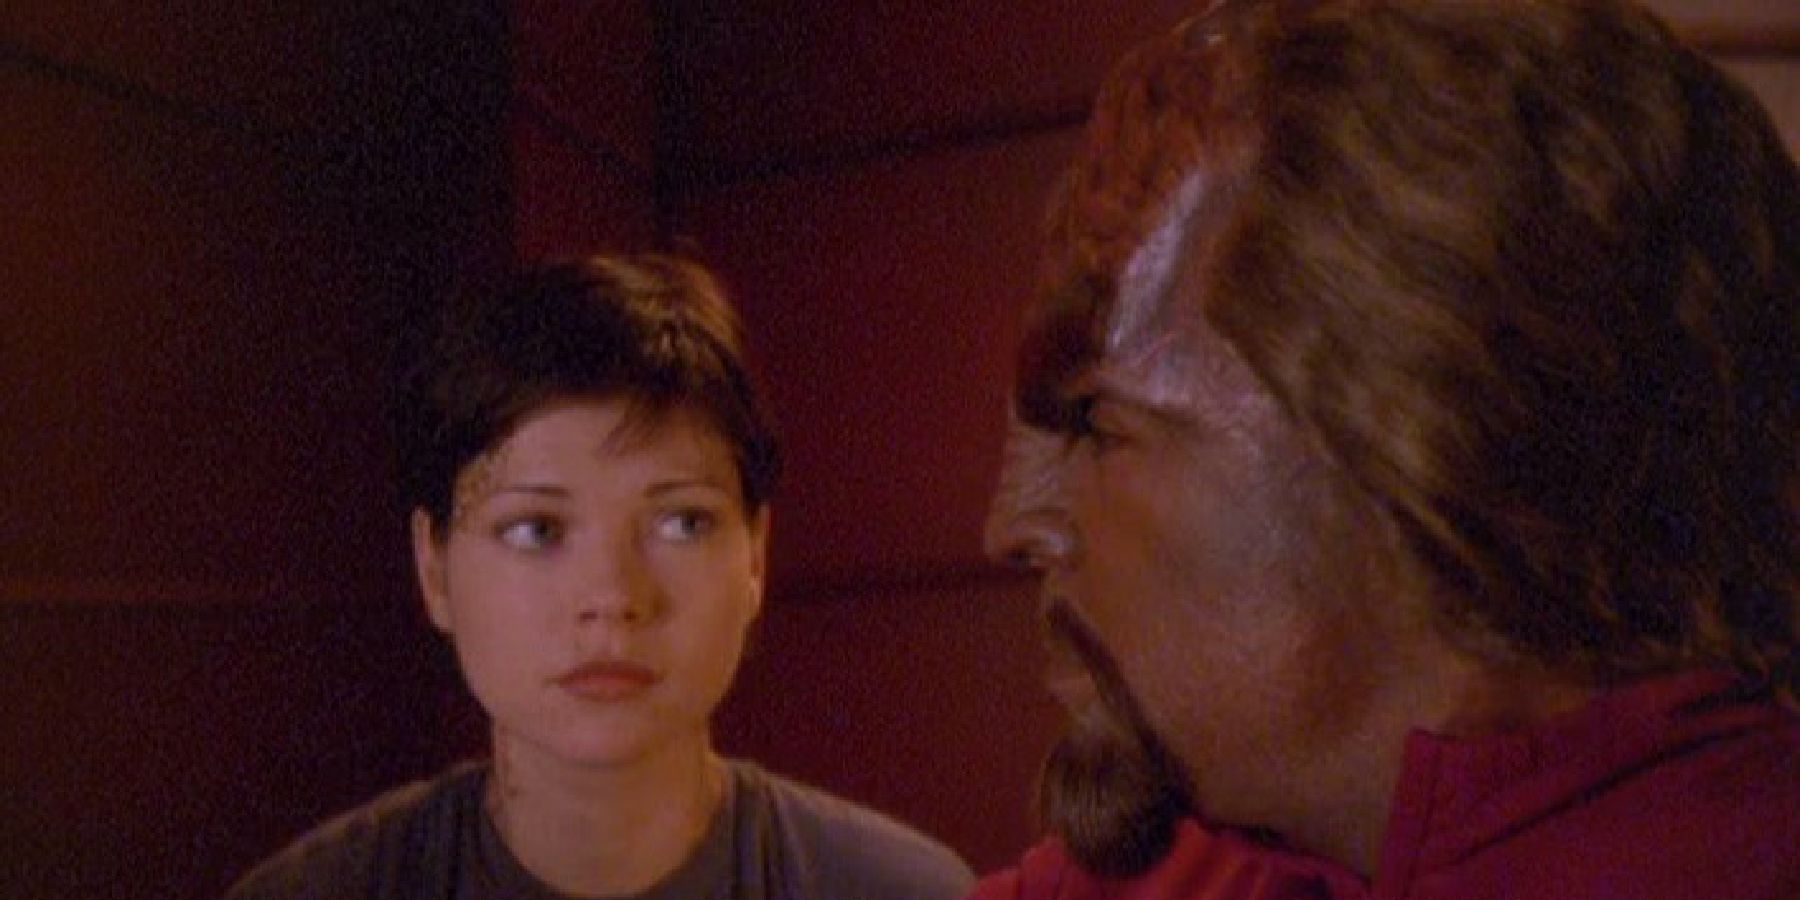 Nicole de Boer and Michael Dorn as Worf looking intensely at each other